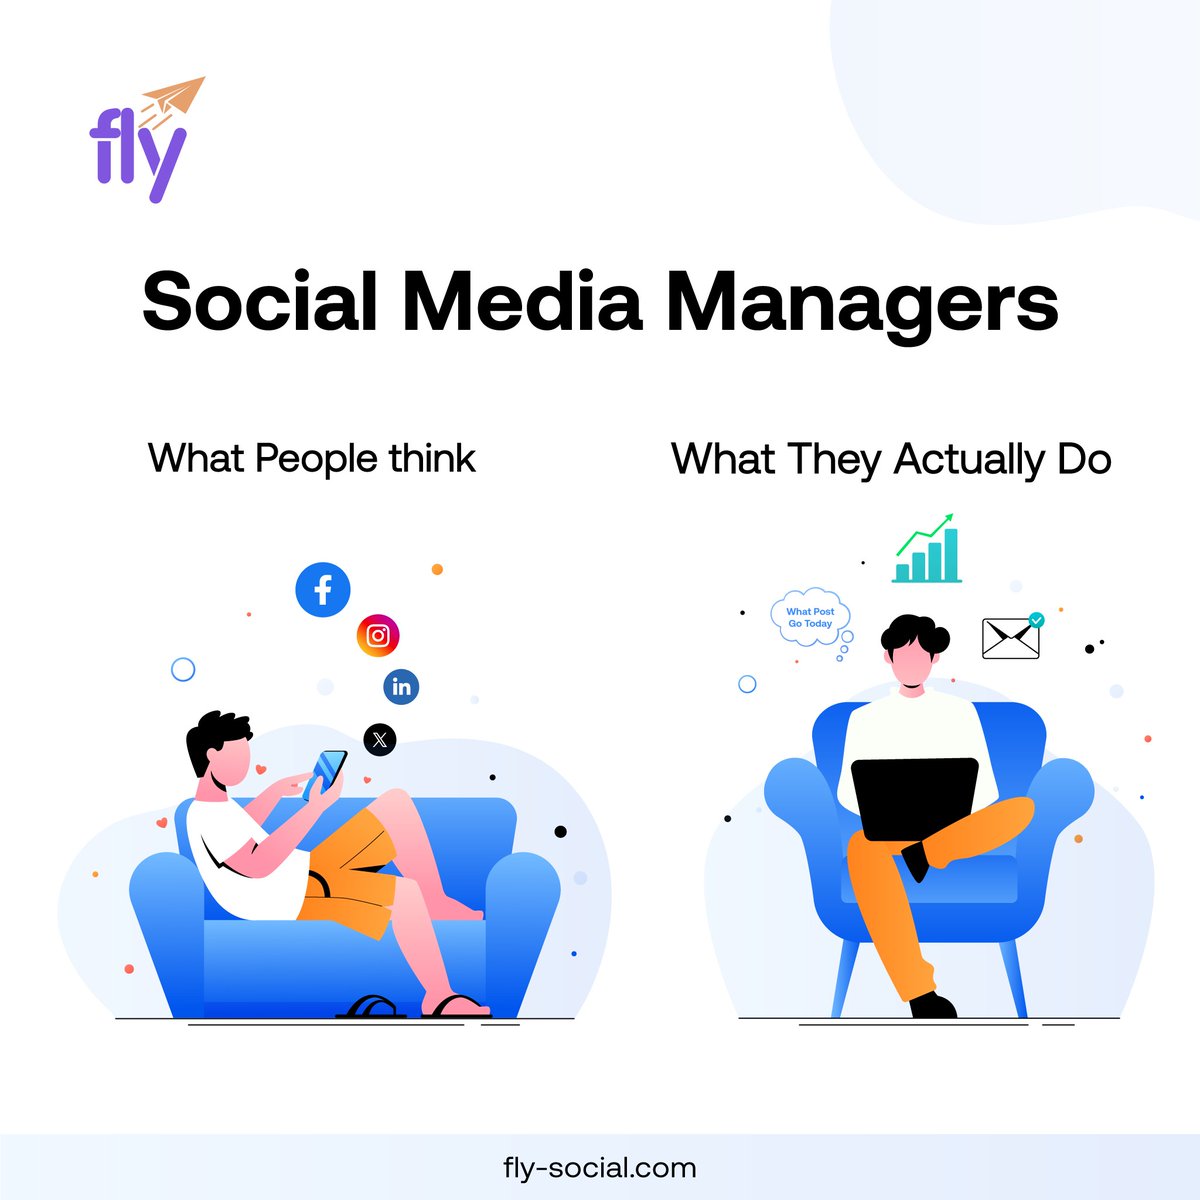 The Struggle Is Real. 😩
The Untold Story Of Social Media Manager.  
#TheStruggleIsReal #SocialMediaManager #FlySocial #SMM #SocialMediaTips #UntoldStory